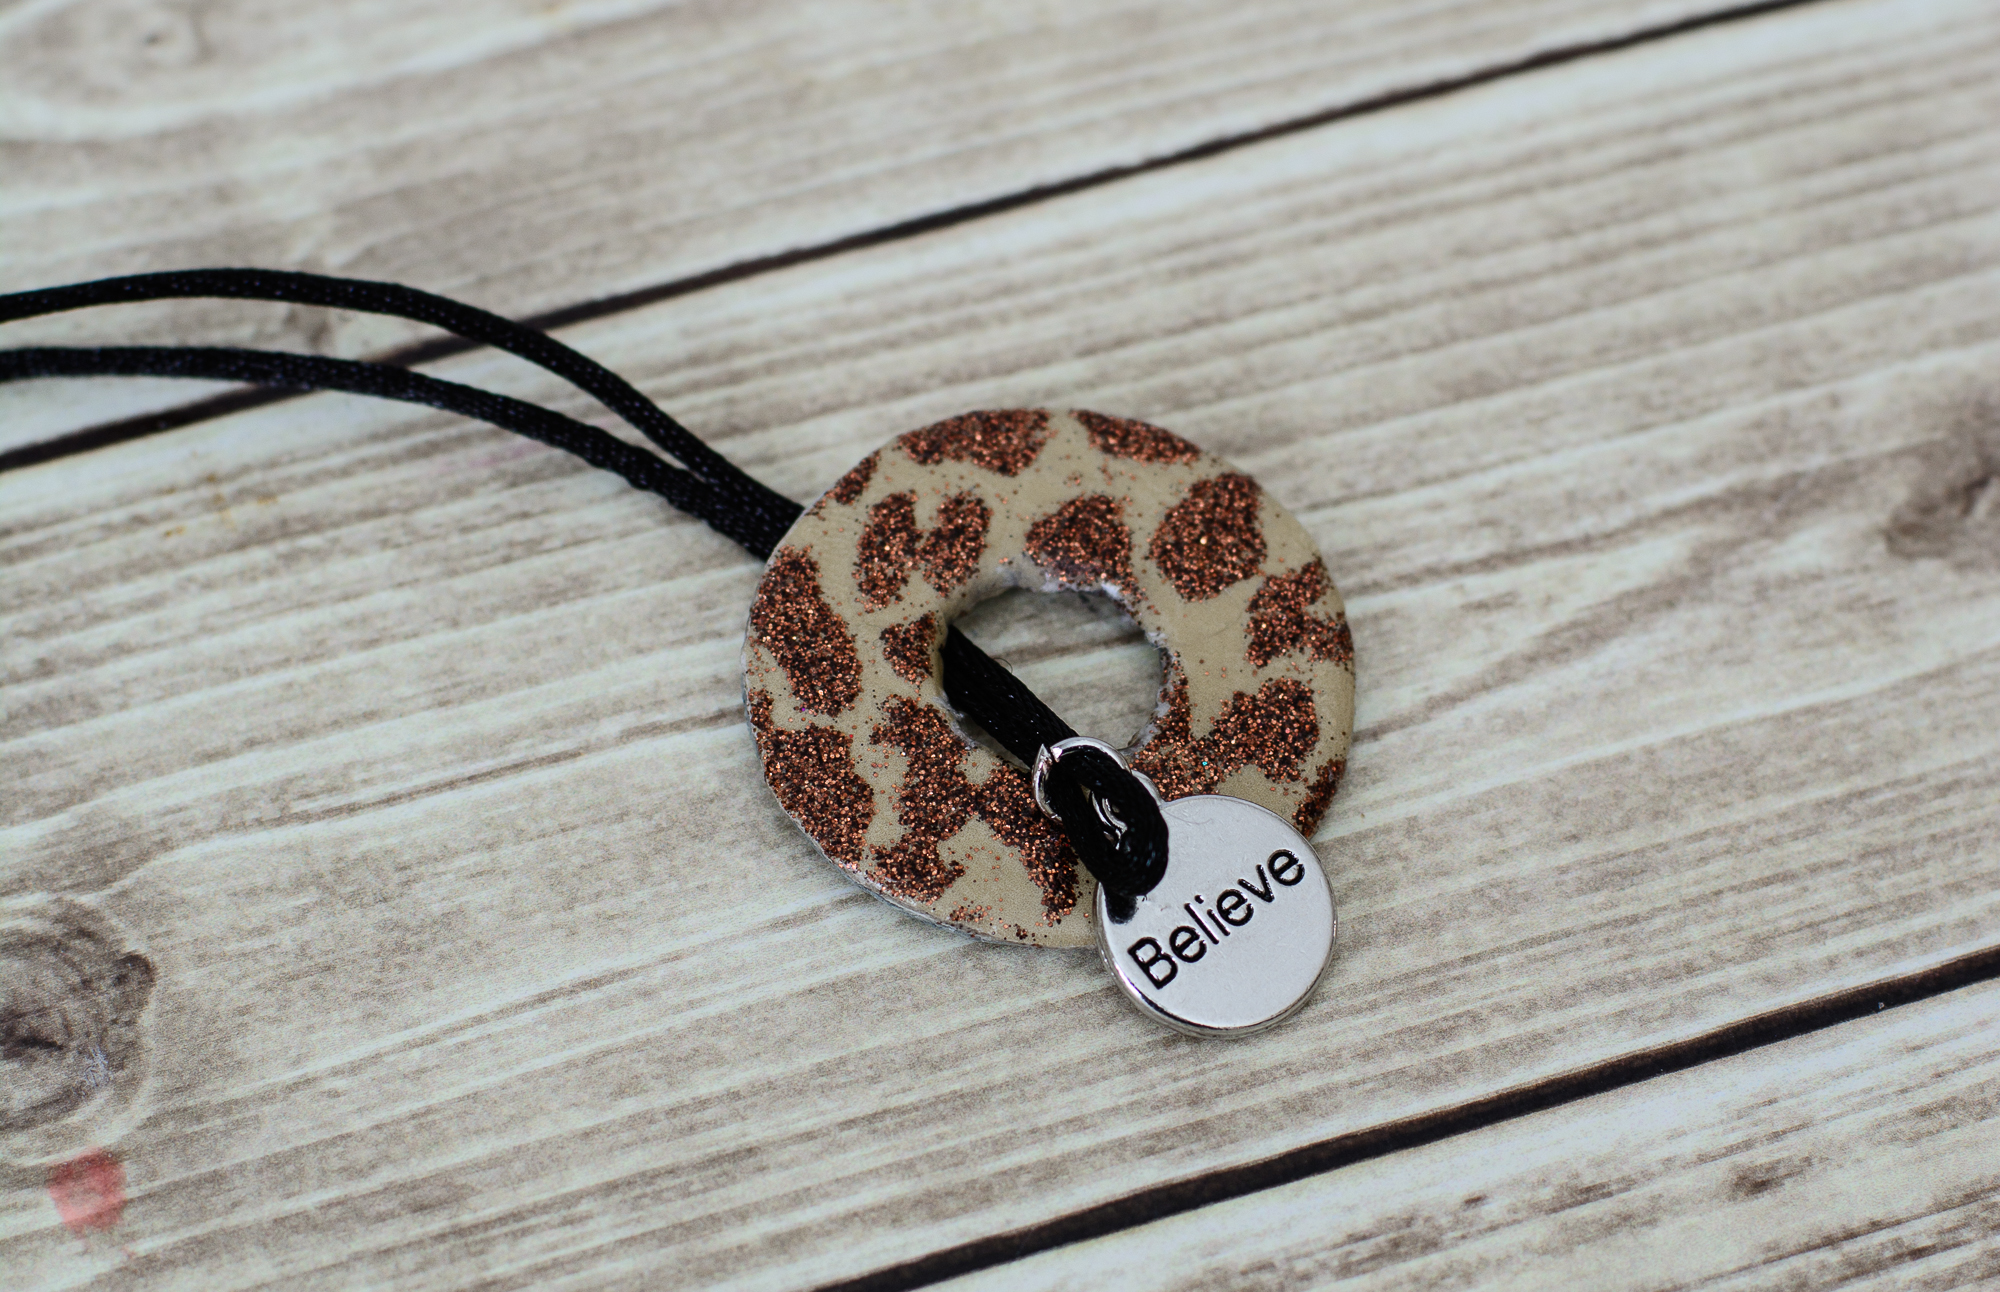 Zootopia Inspiration Necklace. A fun and easy Zootopia craft that kids and adults will love!